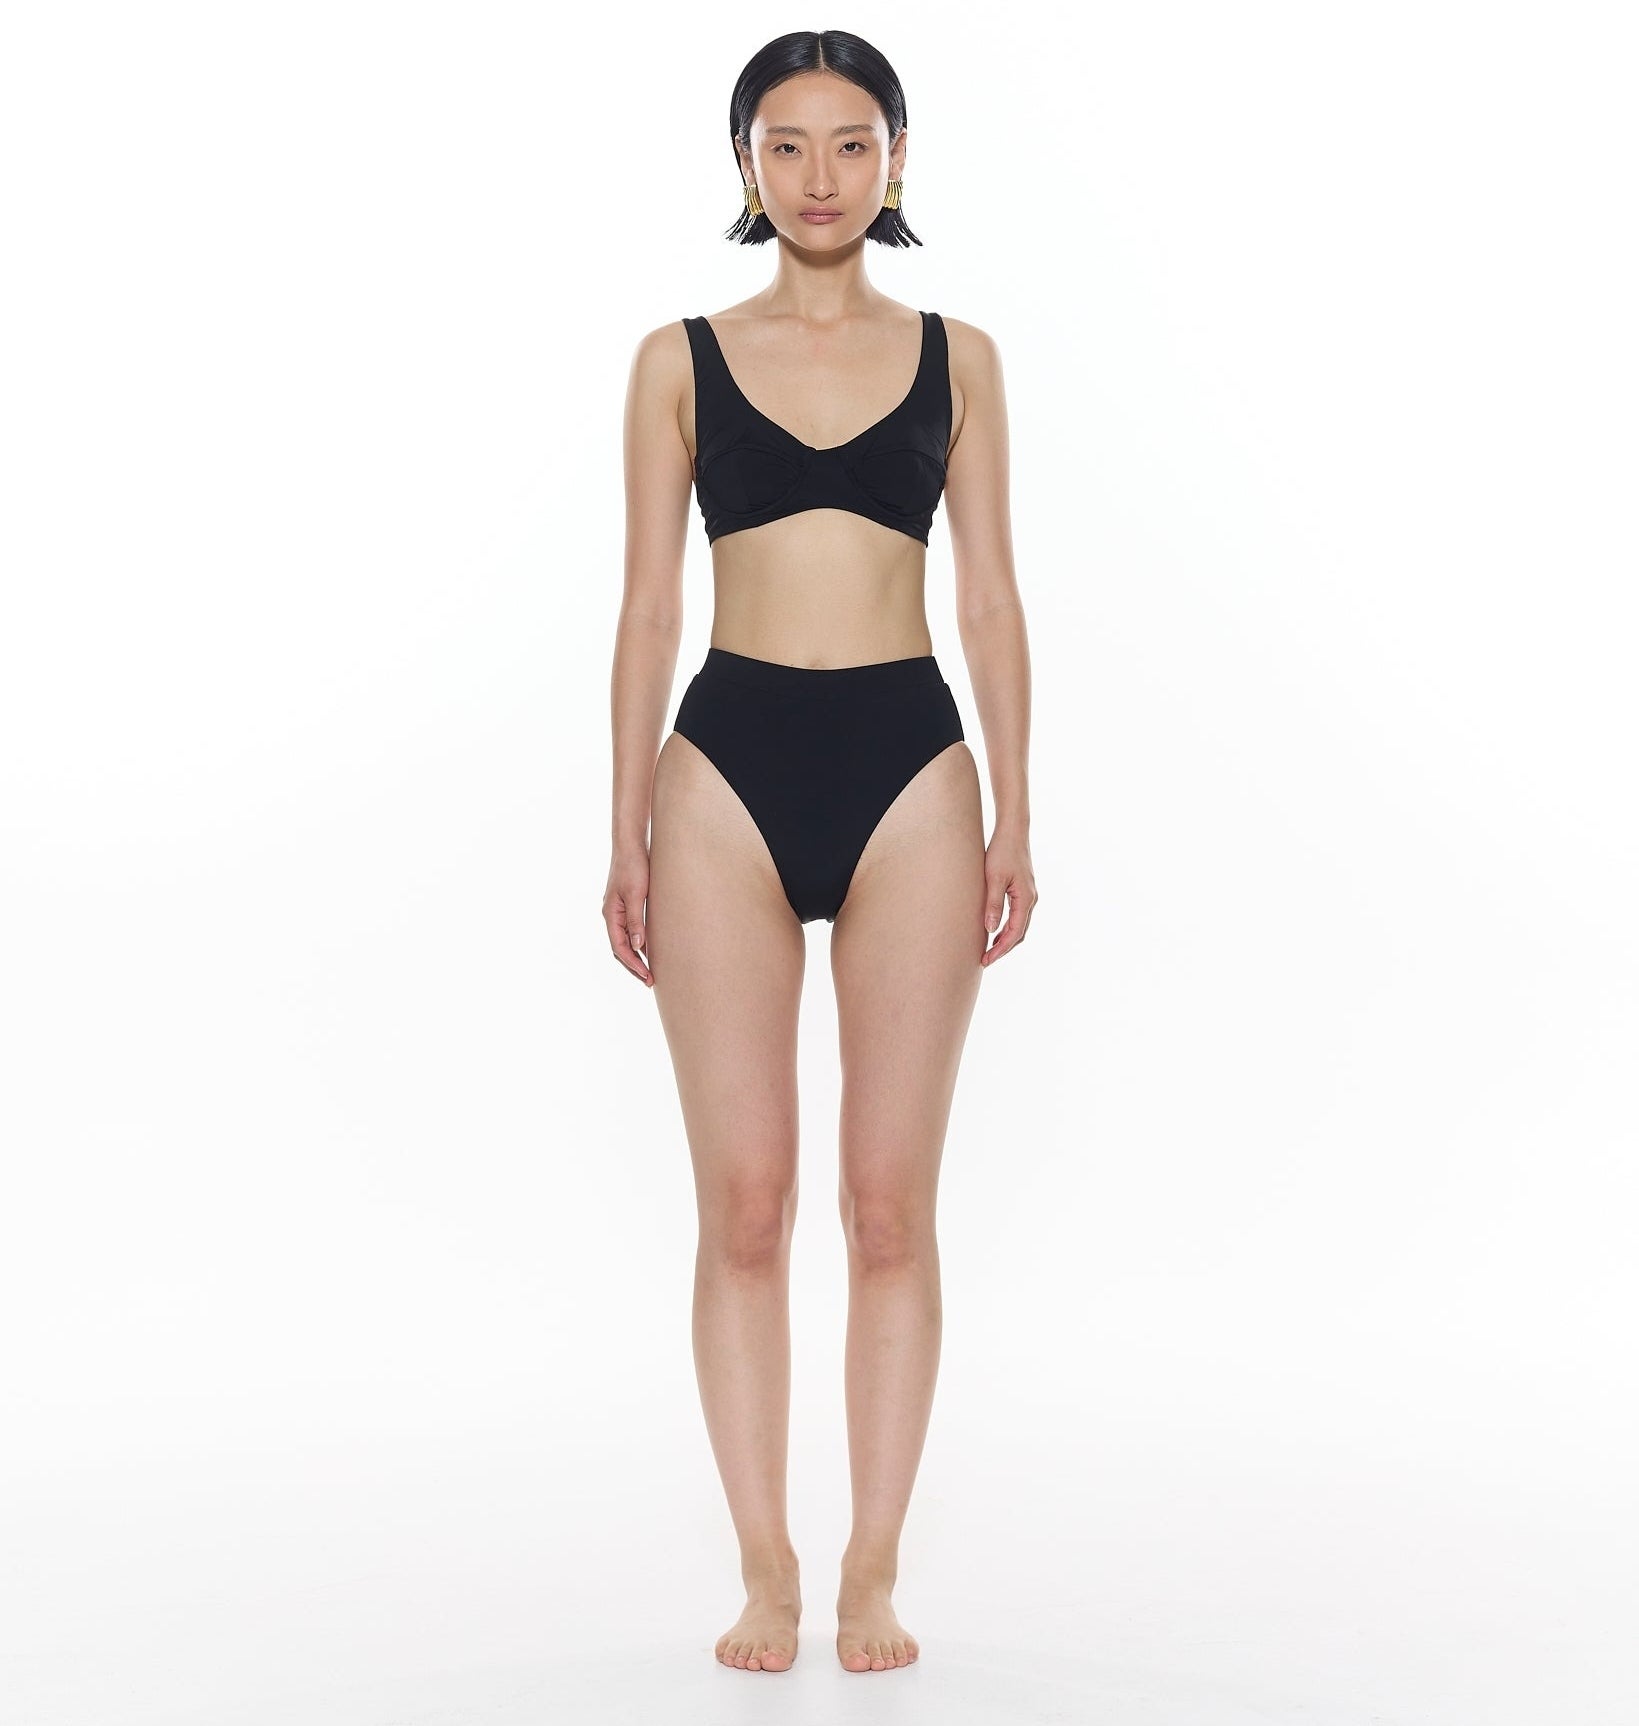 A model standing straight, wearing a simple black two-piece swimsuit, looking directly at the camera